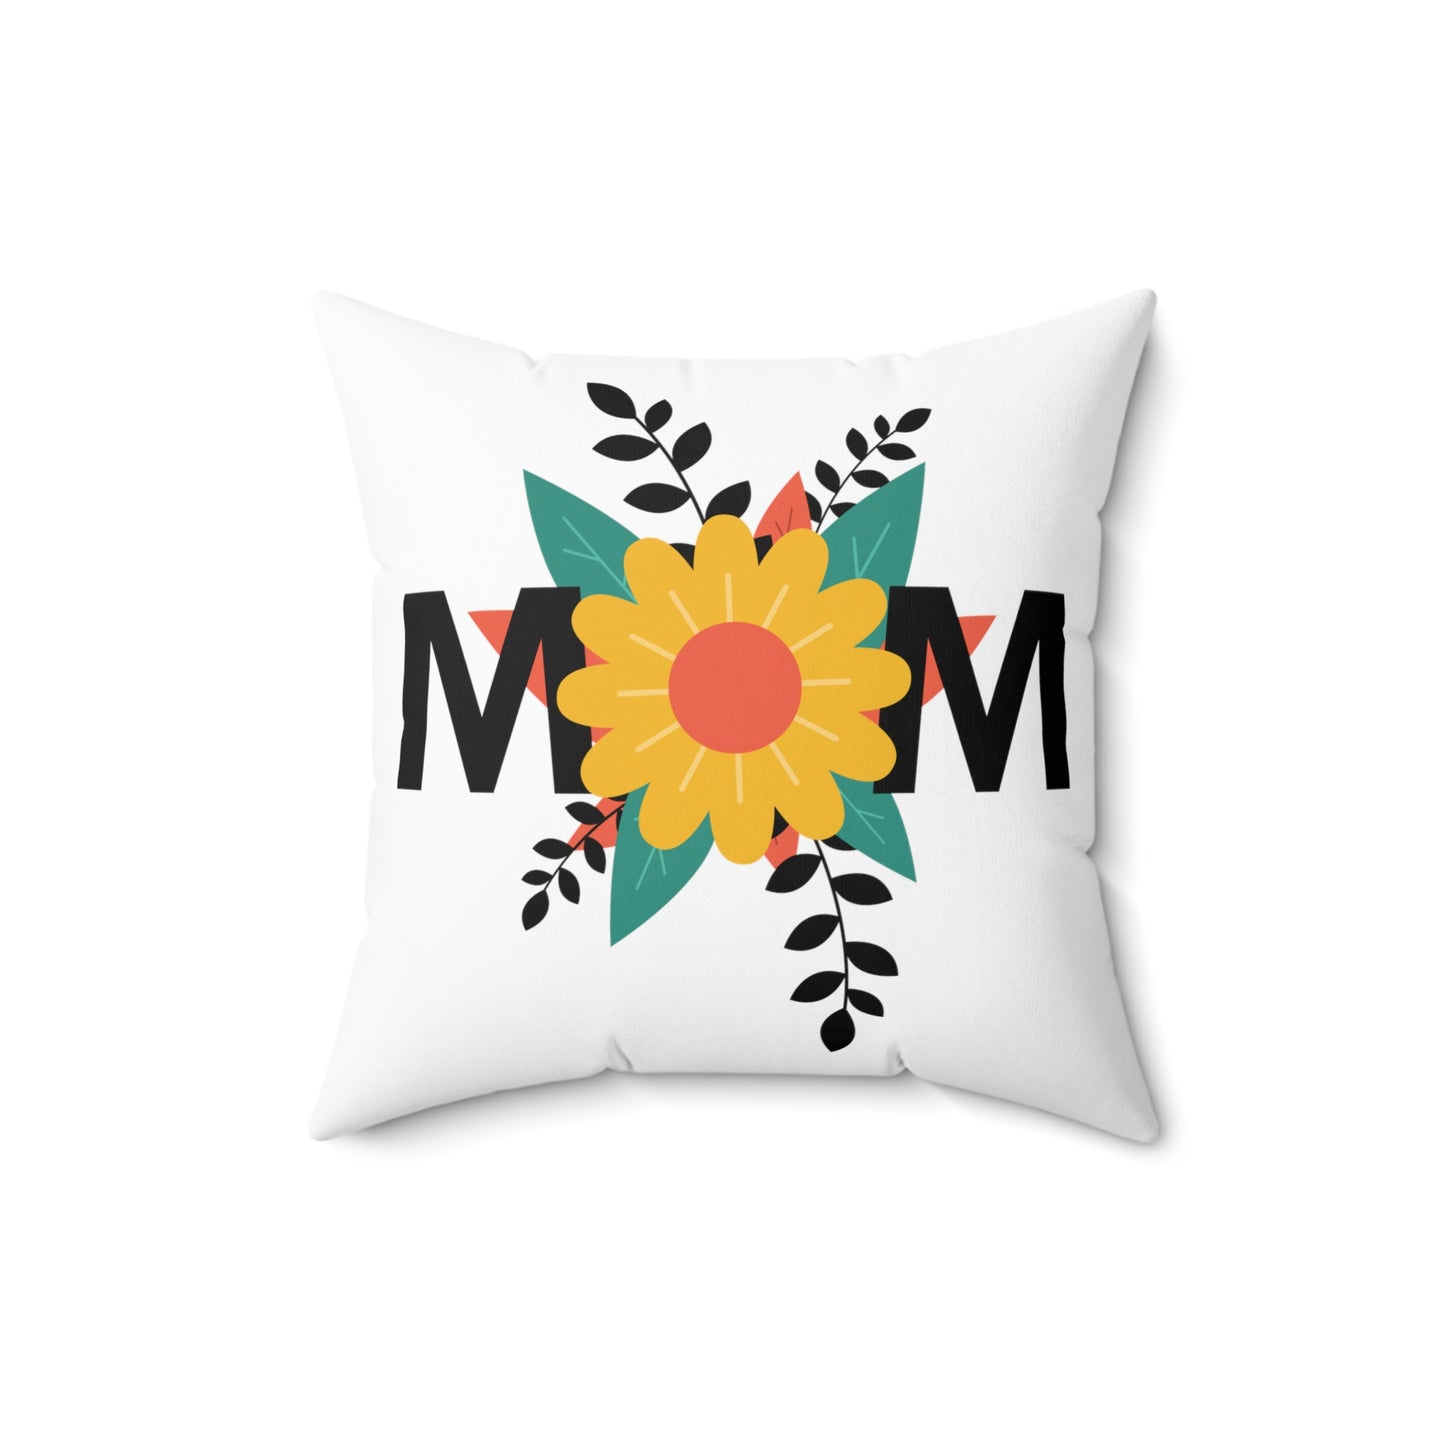 Spun Polyester Square Pillow Case "Mom Flowers on White”